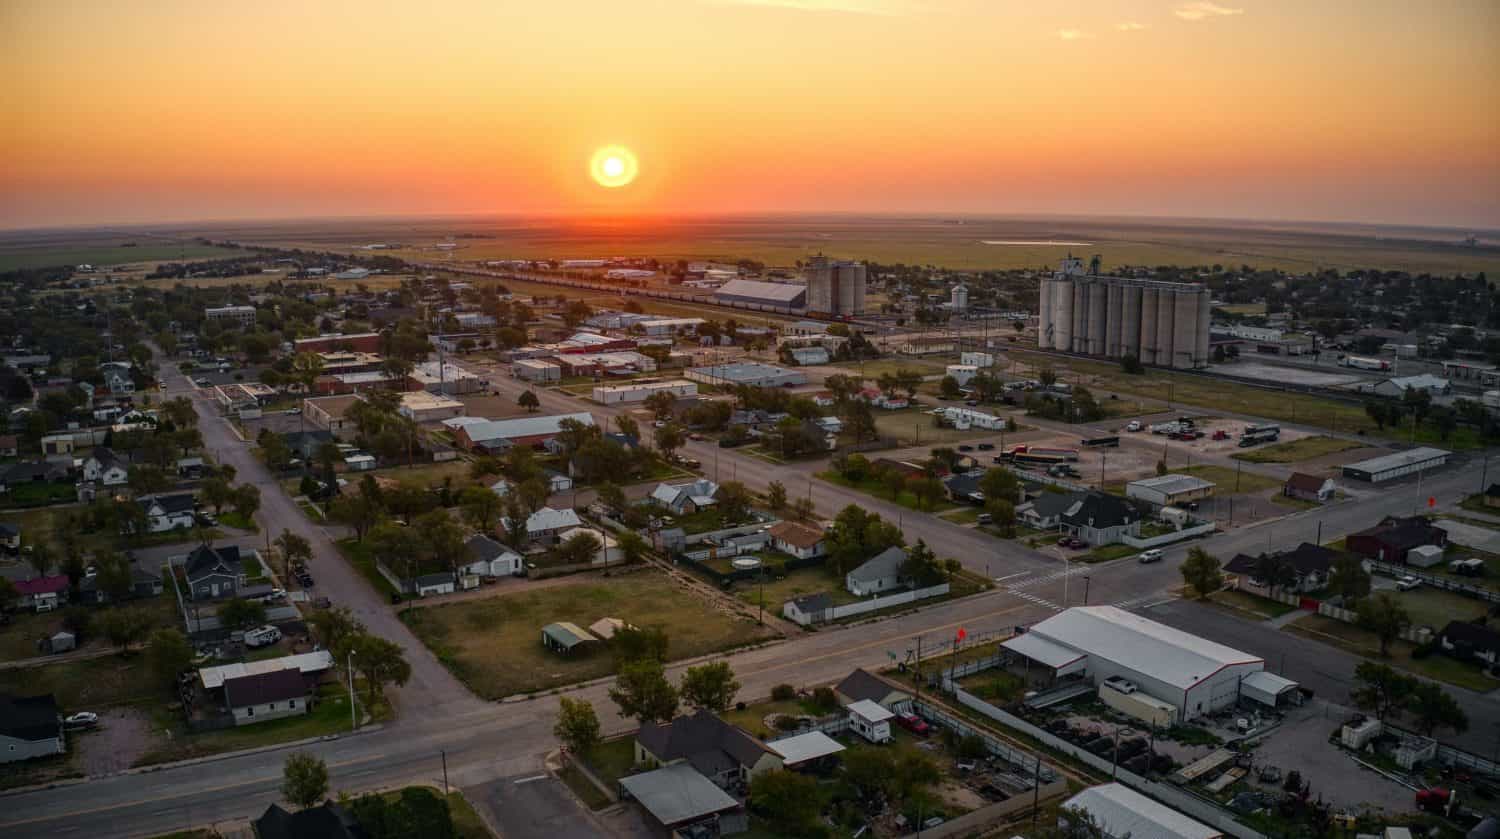 Aerial View of Sunrise in Stratford, Texas